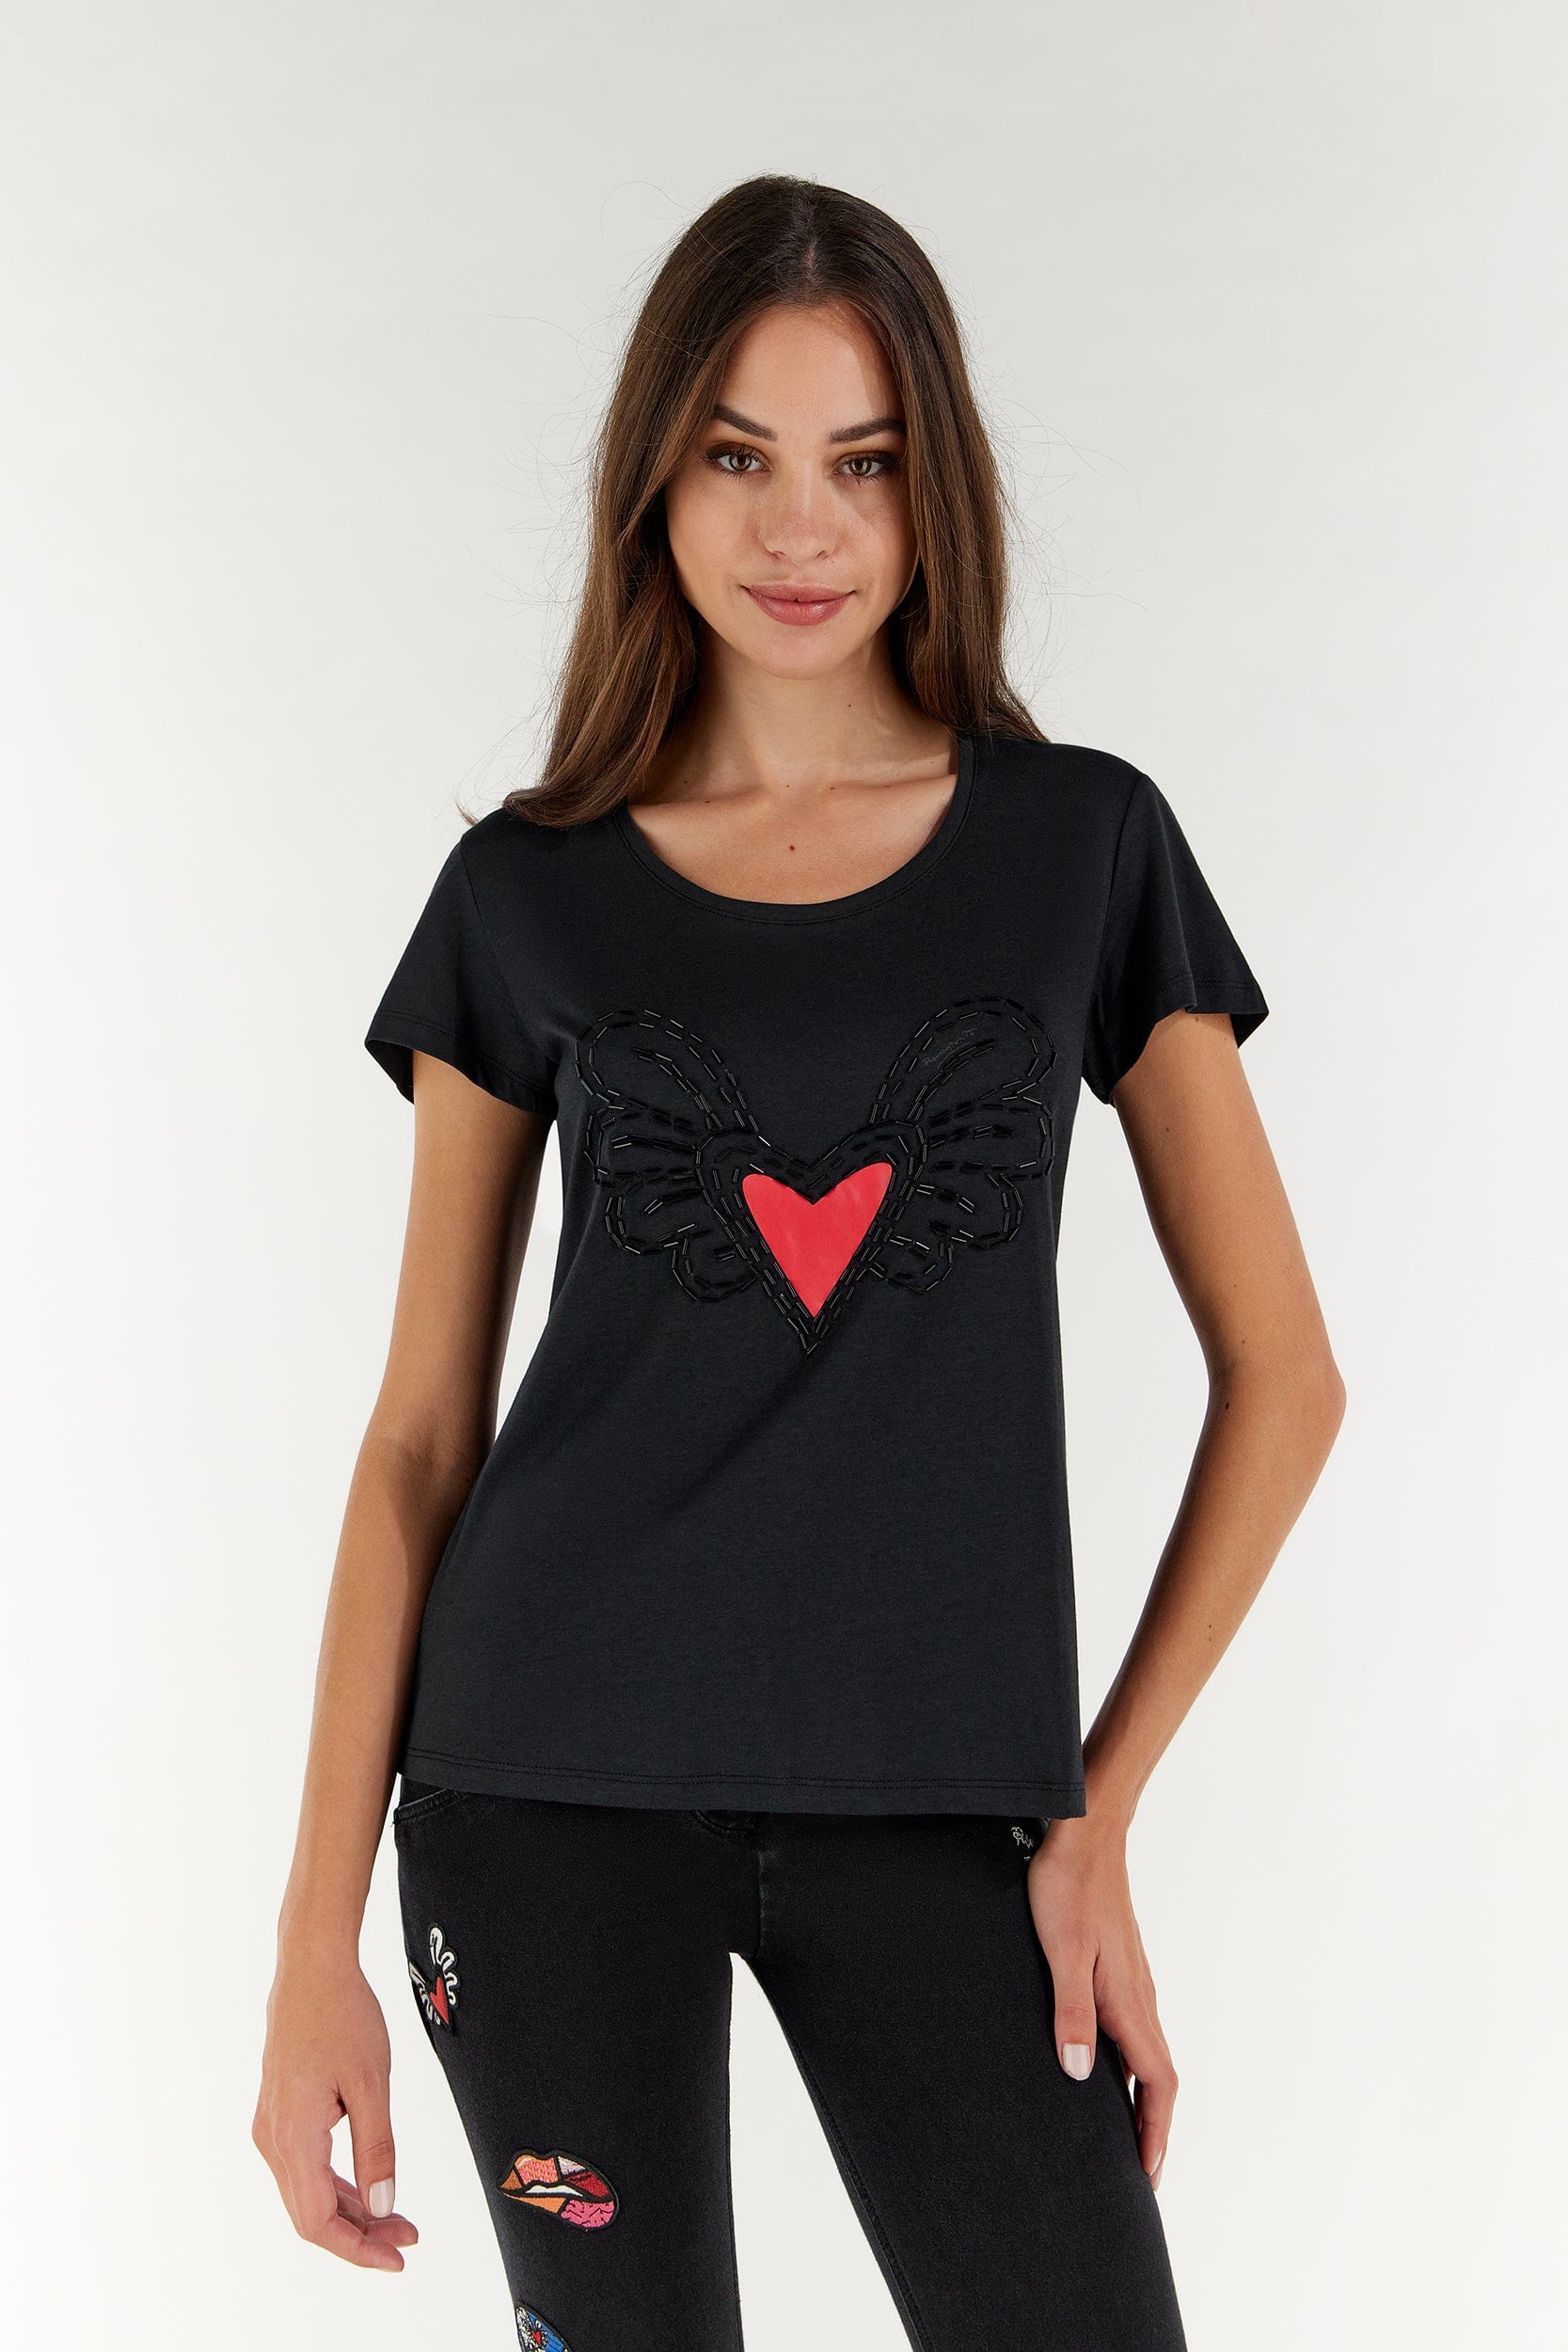 T Shirt with Winged Heart - Romero Britto Collection - Black 2